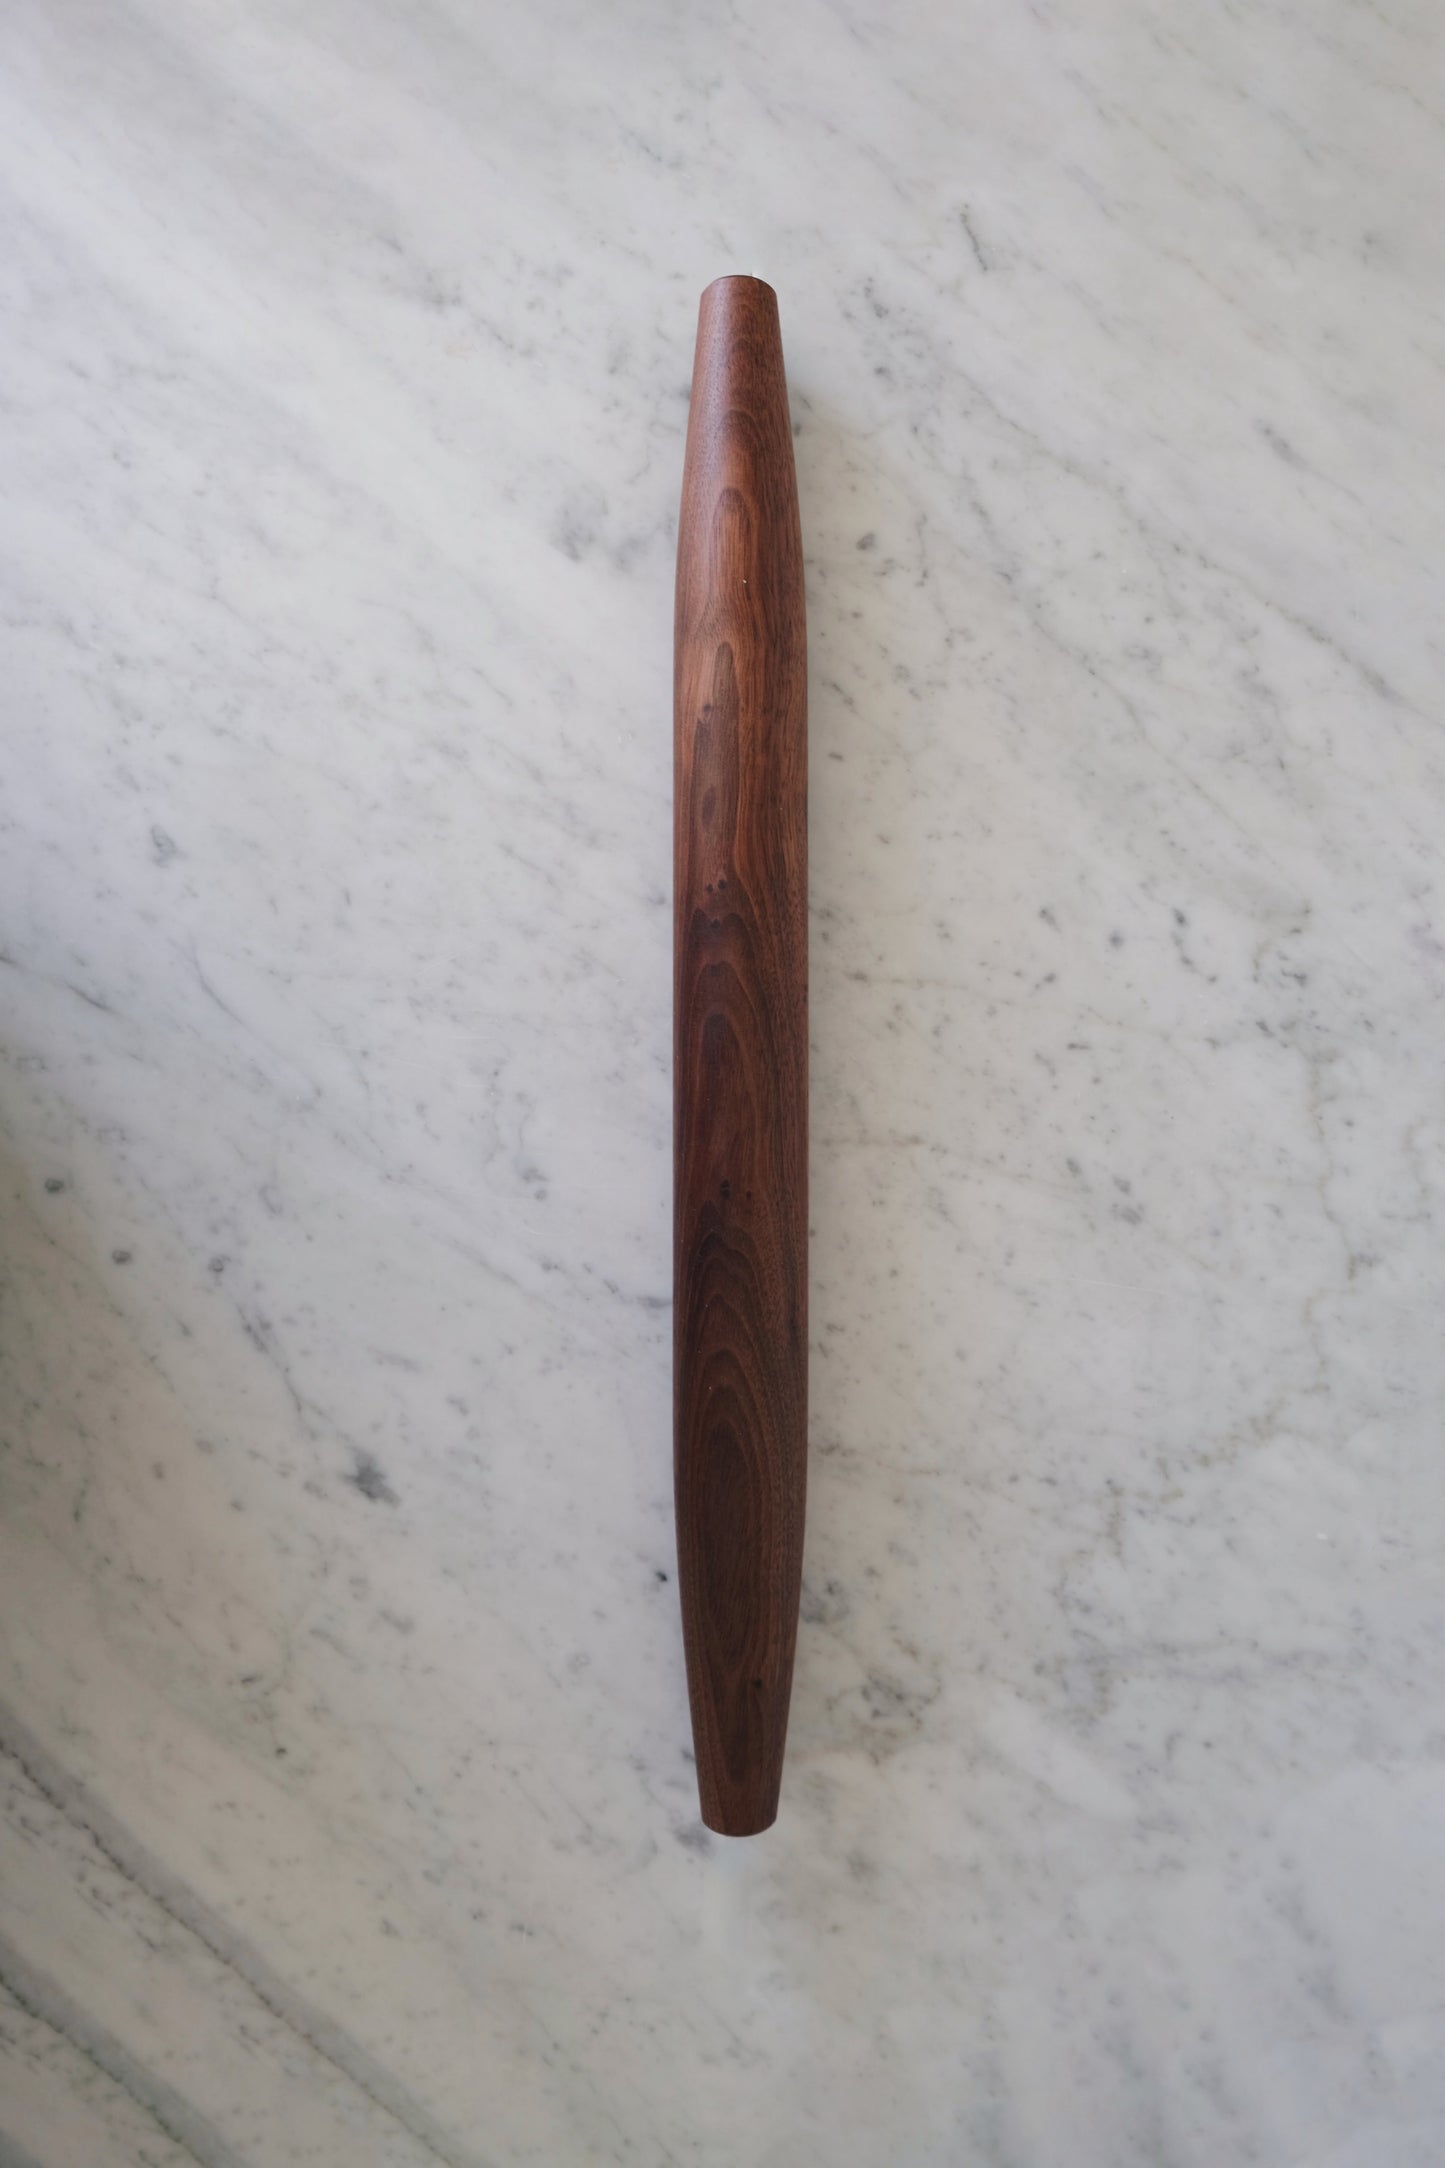 Walnut rolling pin on a marble countertop